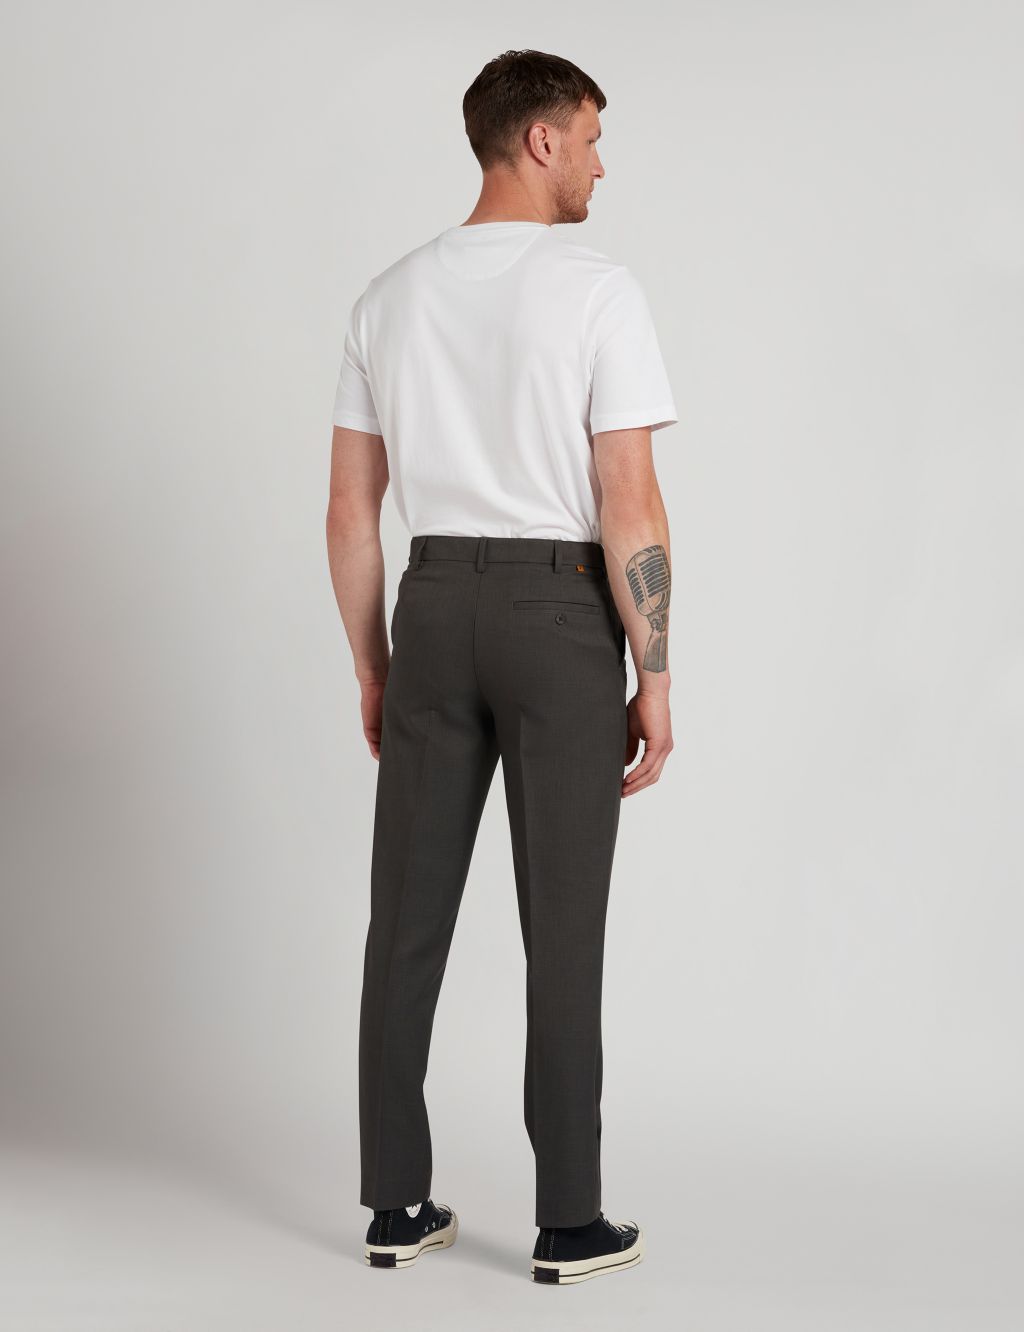 Tailored Fit Smart Trousers image 3